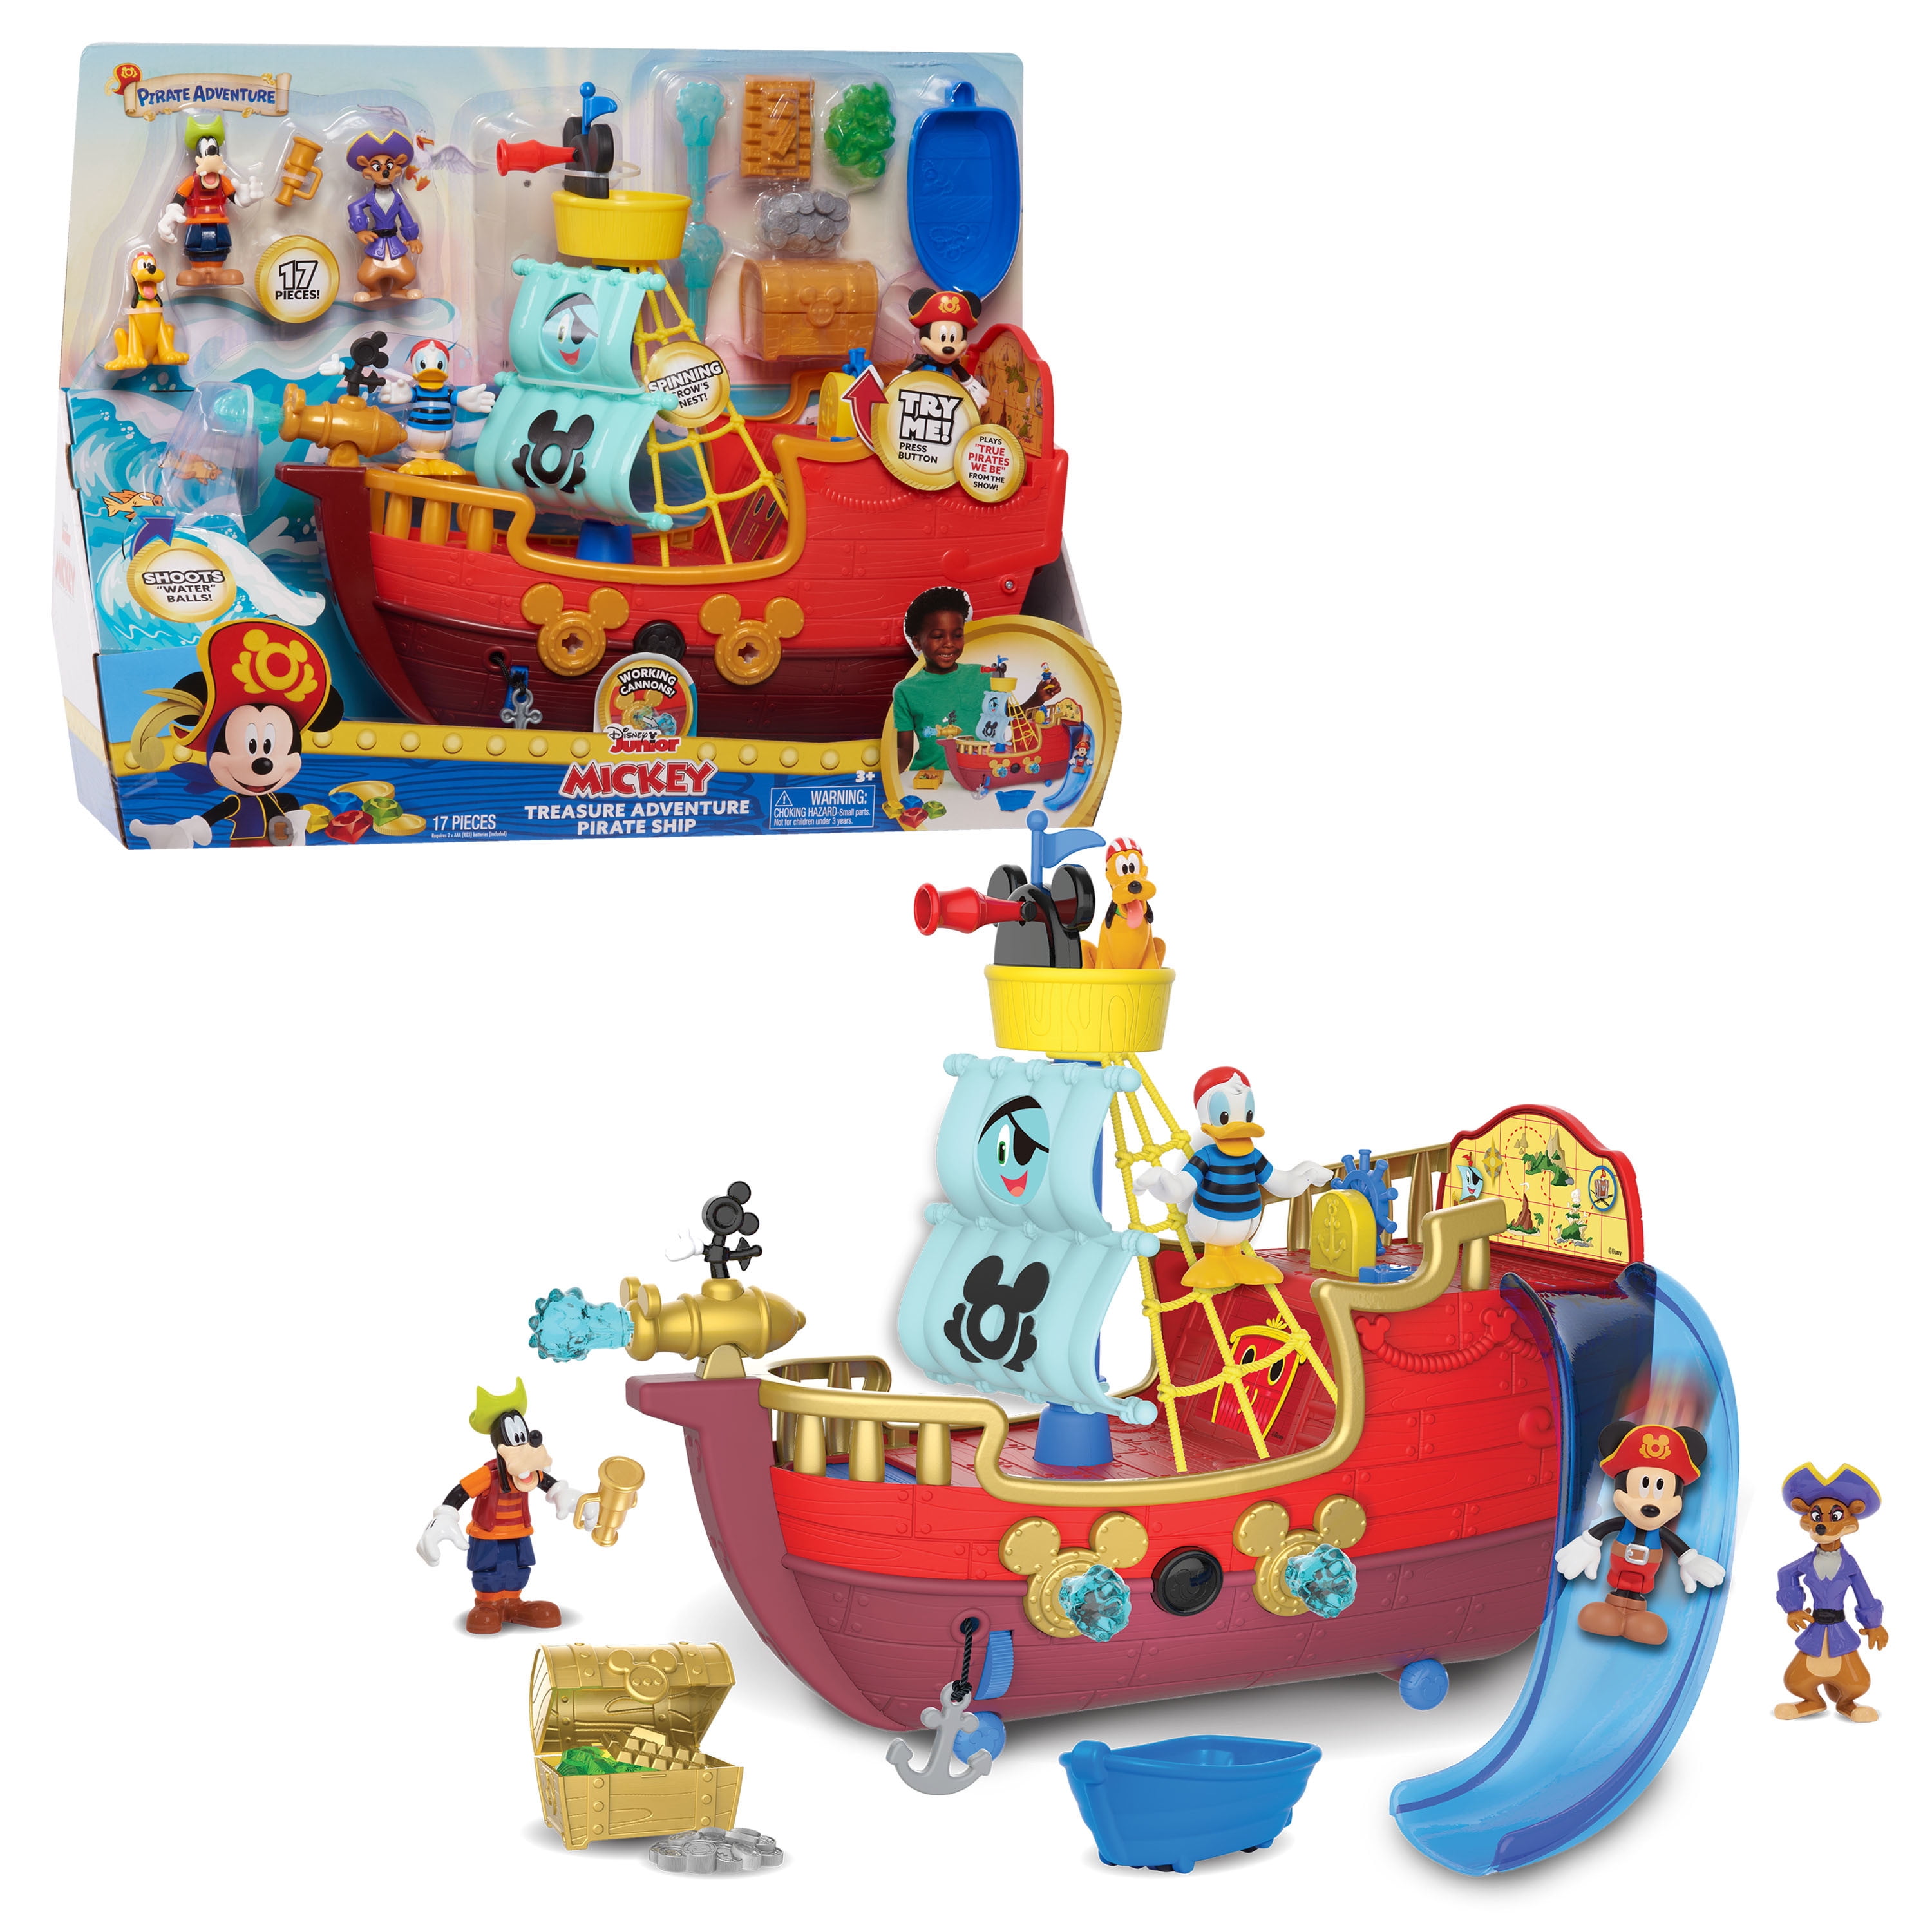 Just Play Disney Junior Mickey Mouse Funhouse Treasure Adventure Pirate Ship, Kids Toys for Ages 3 up